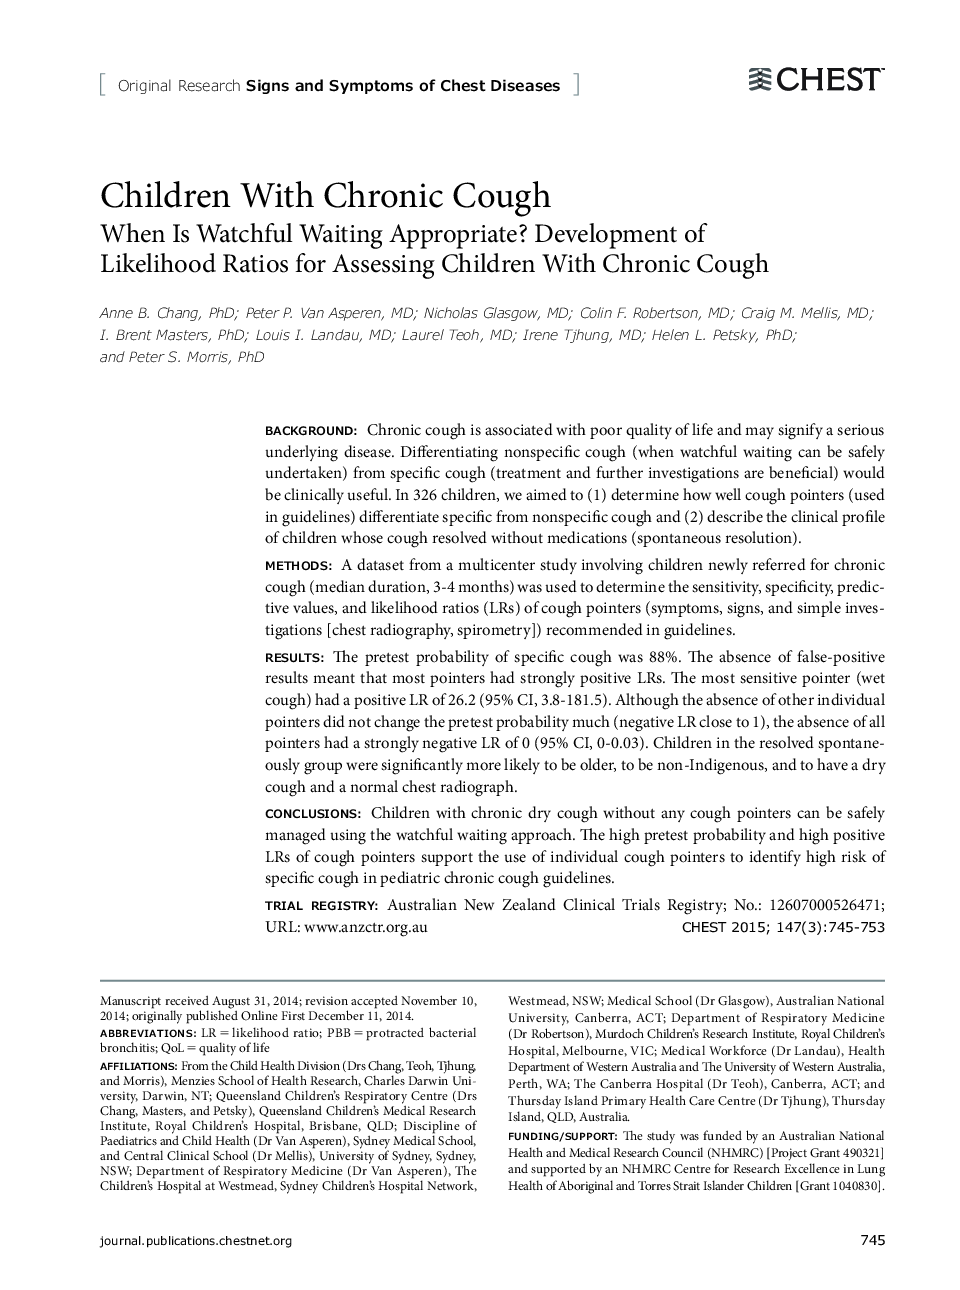 Children With Chronic Cough : When Is Watchful Waiting Appropriate? Development of Likelihood Ratios for Assessing Children With Chronic Cough